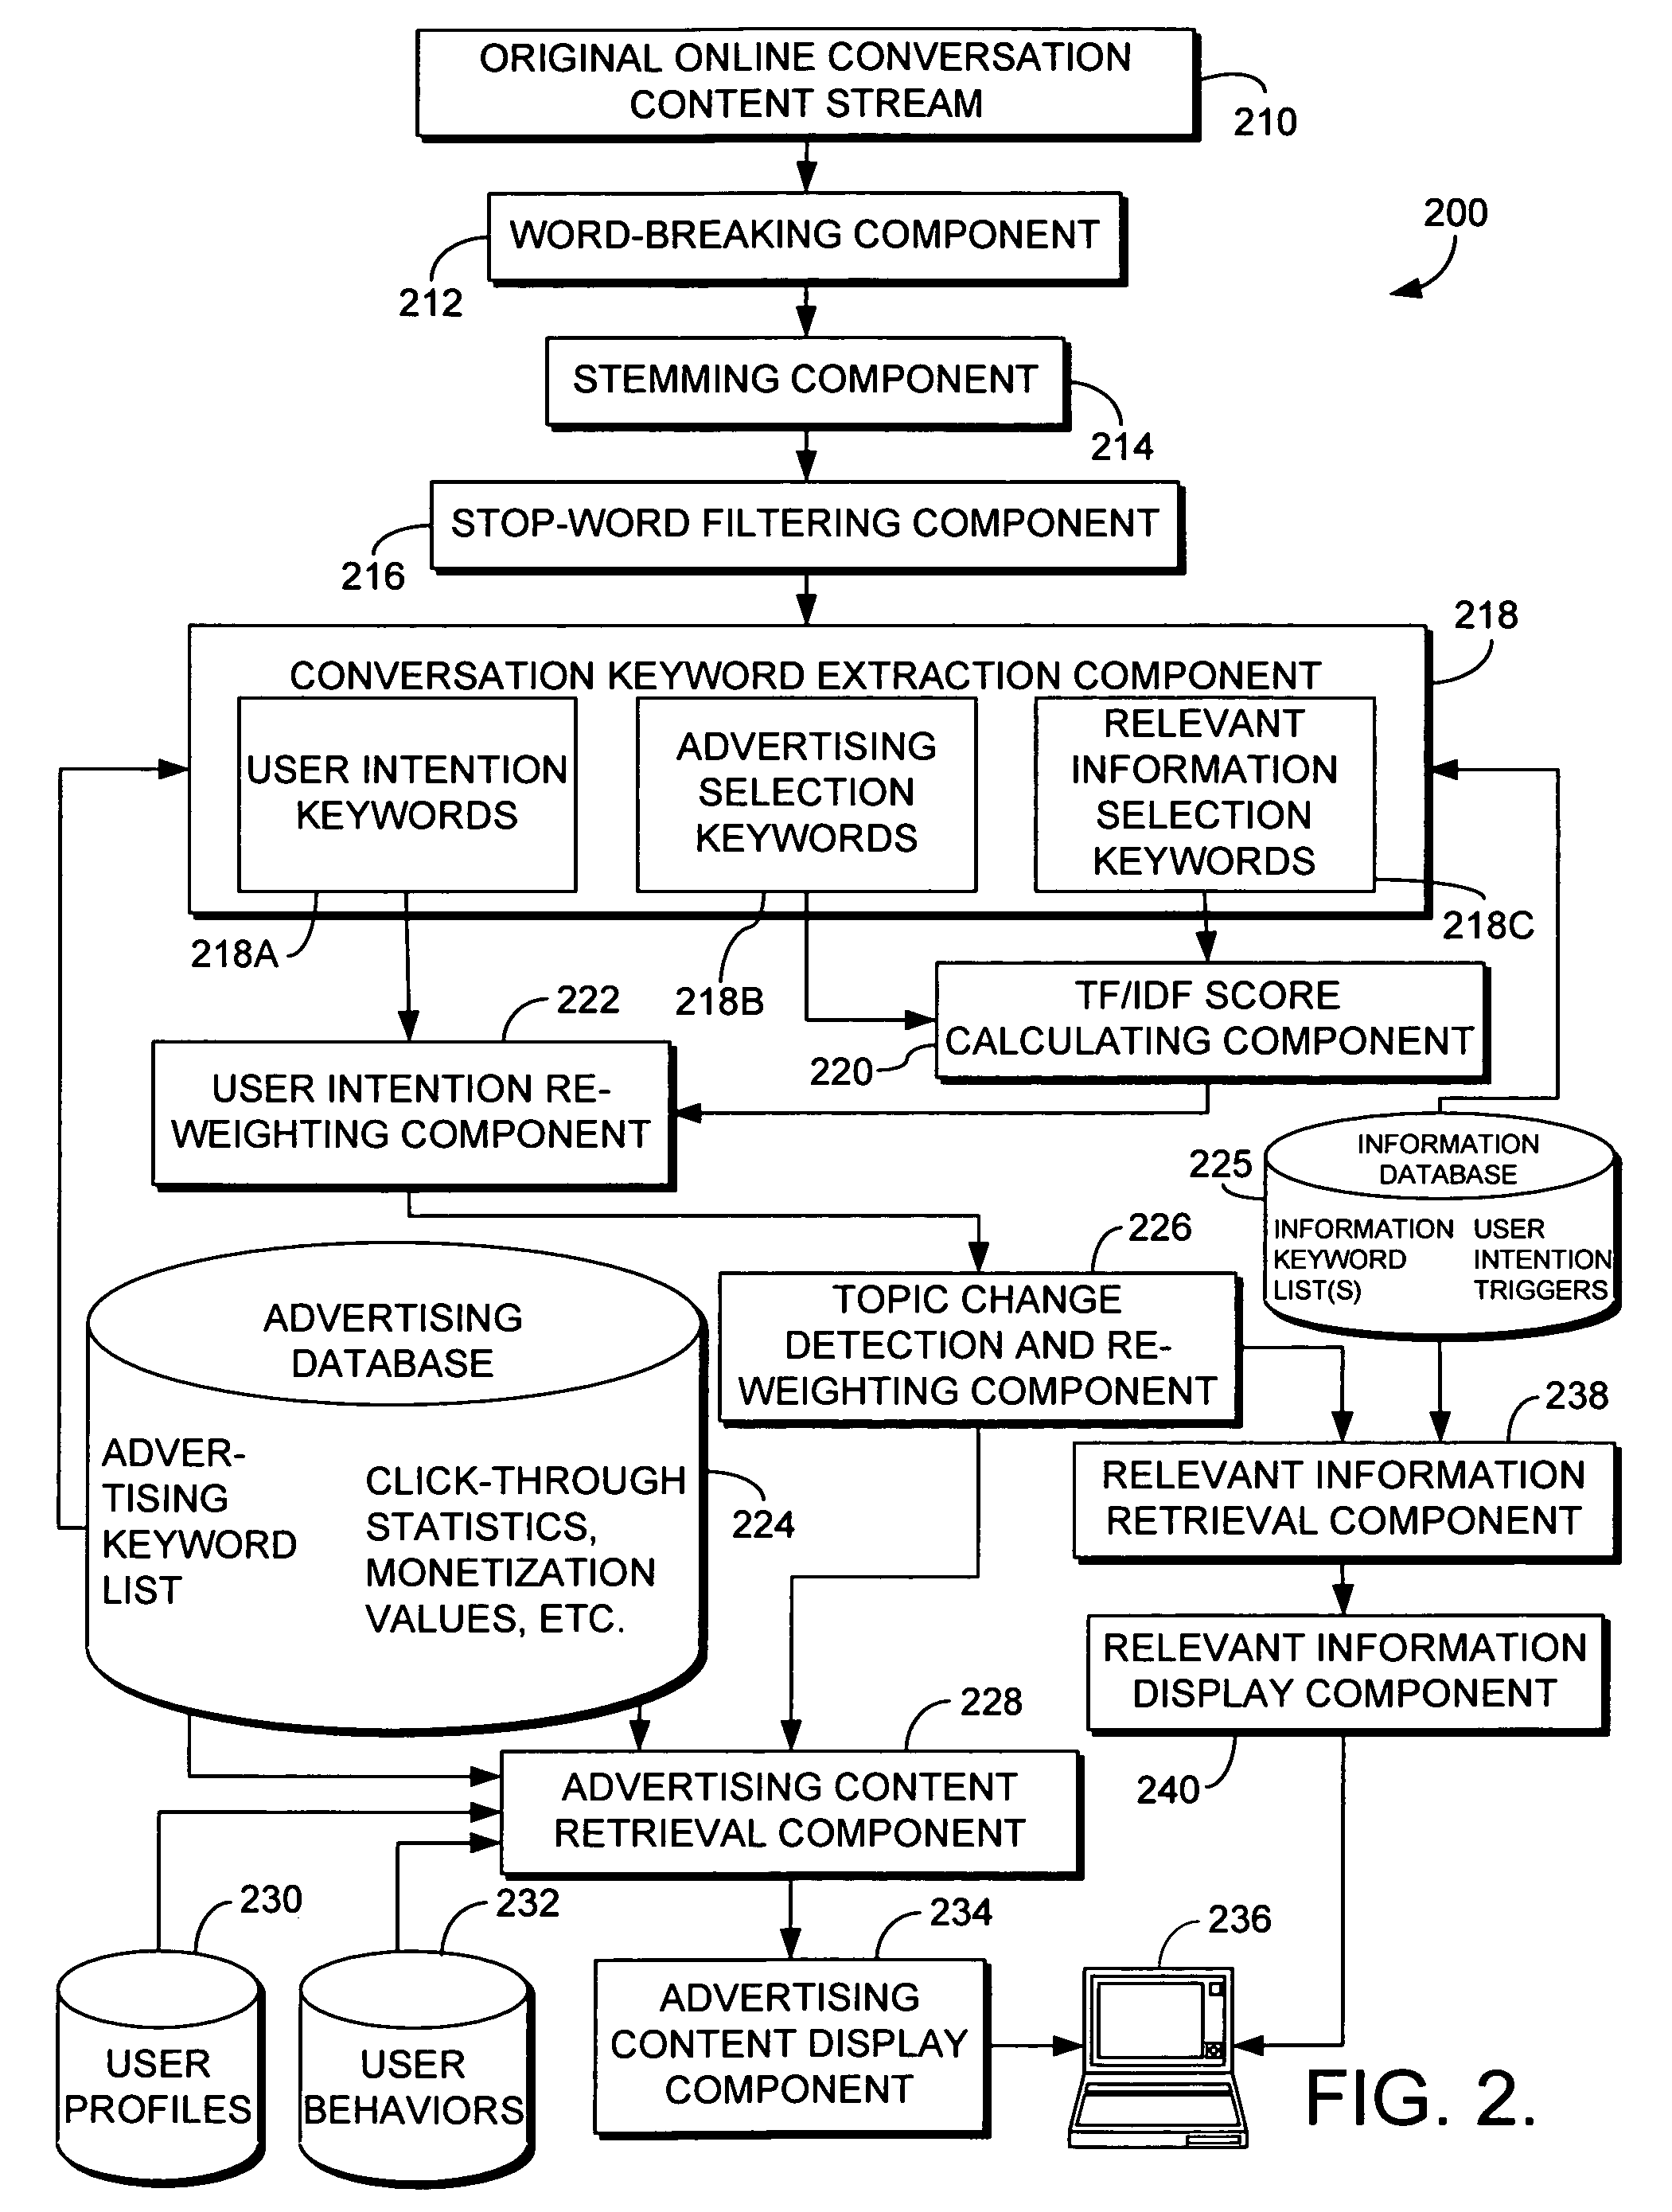 System and method for utilizing the content of an online conversation to select advertising content and/or other relevant information for display